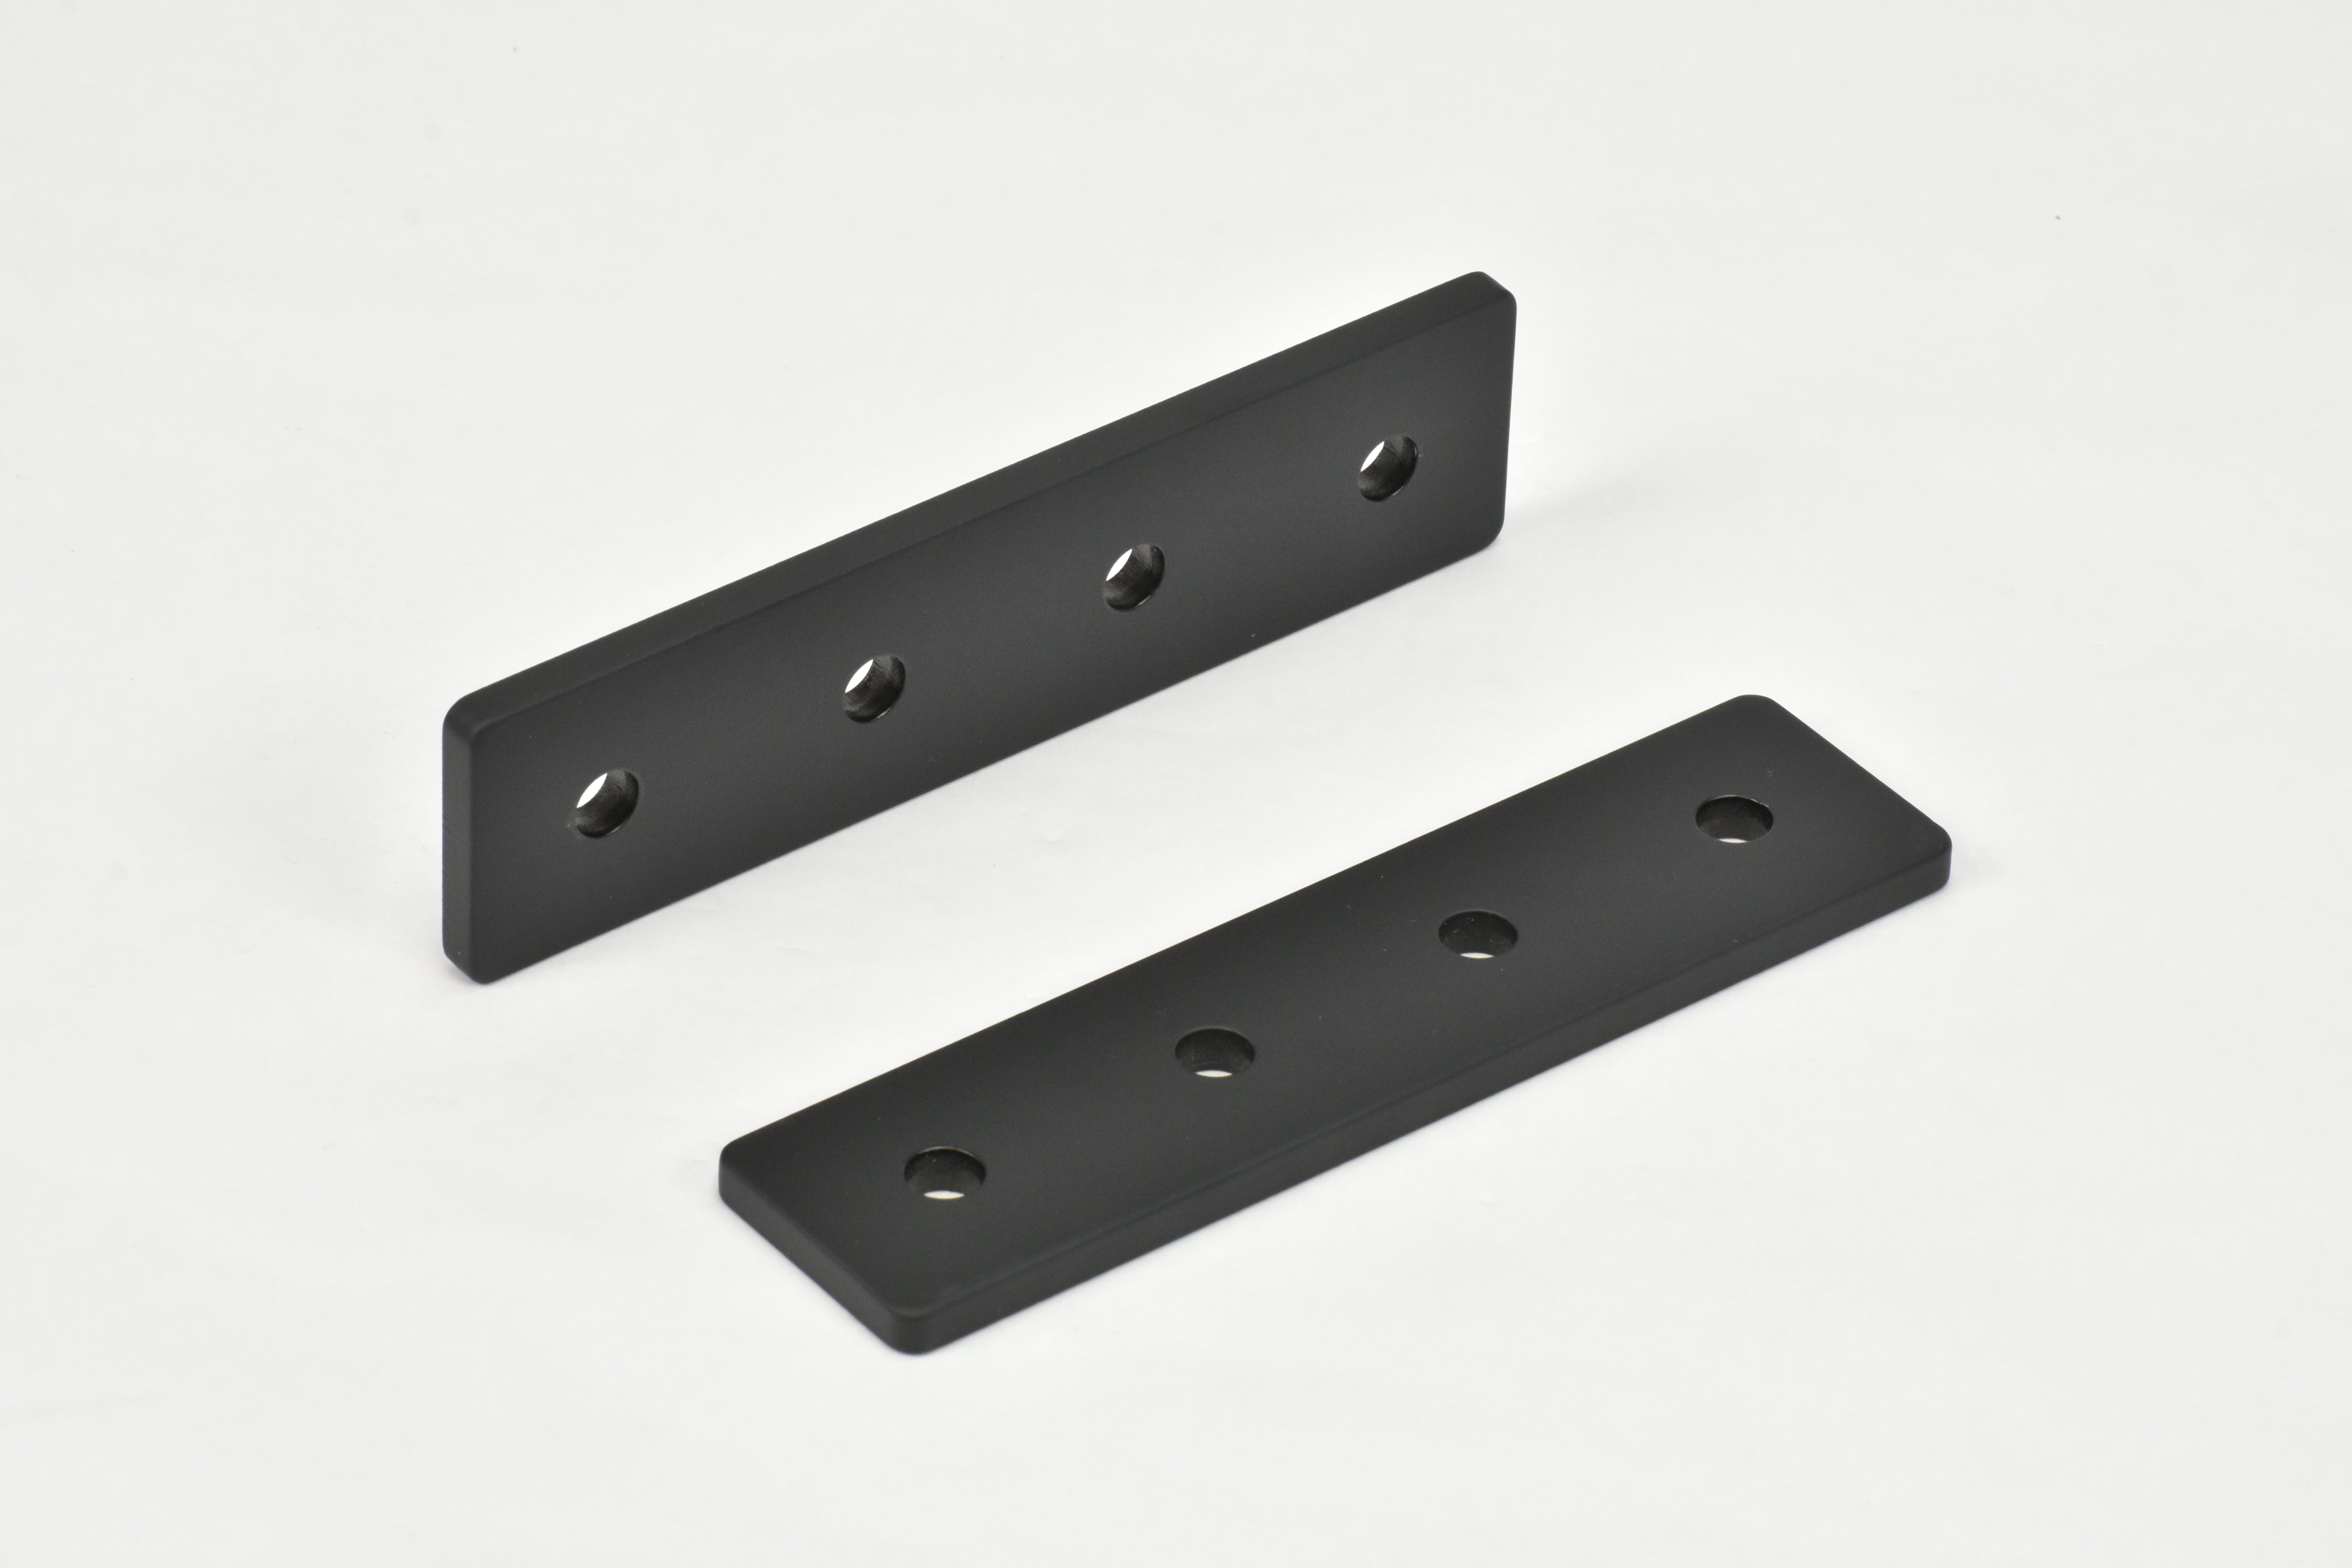 Splice Plate Kit, Set of 2 x 15 Series 4 Hole Flat Plates with Hardware